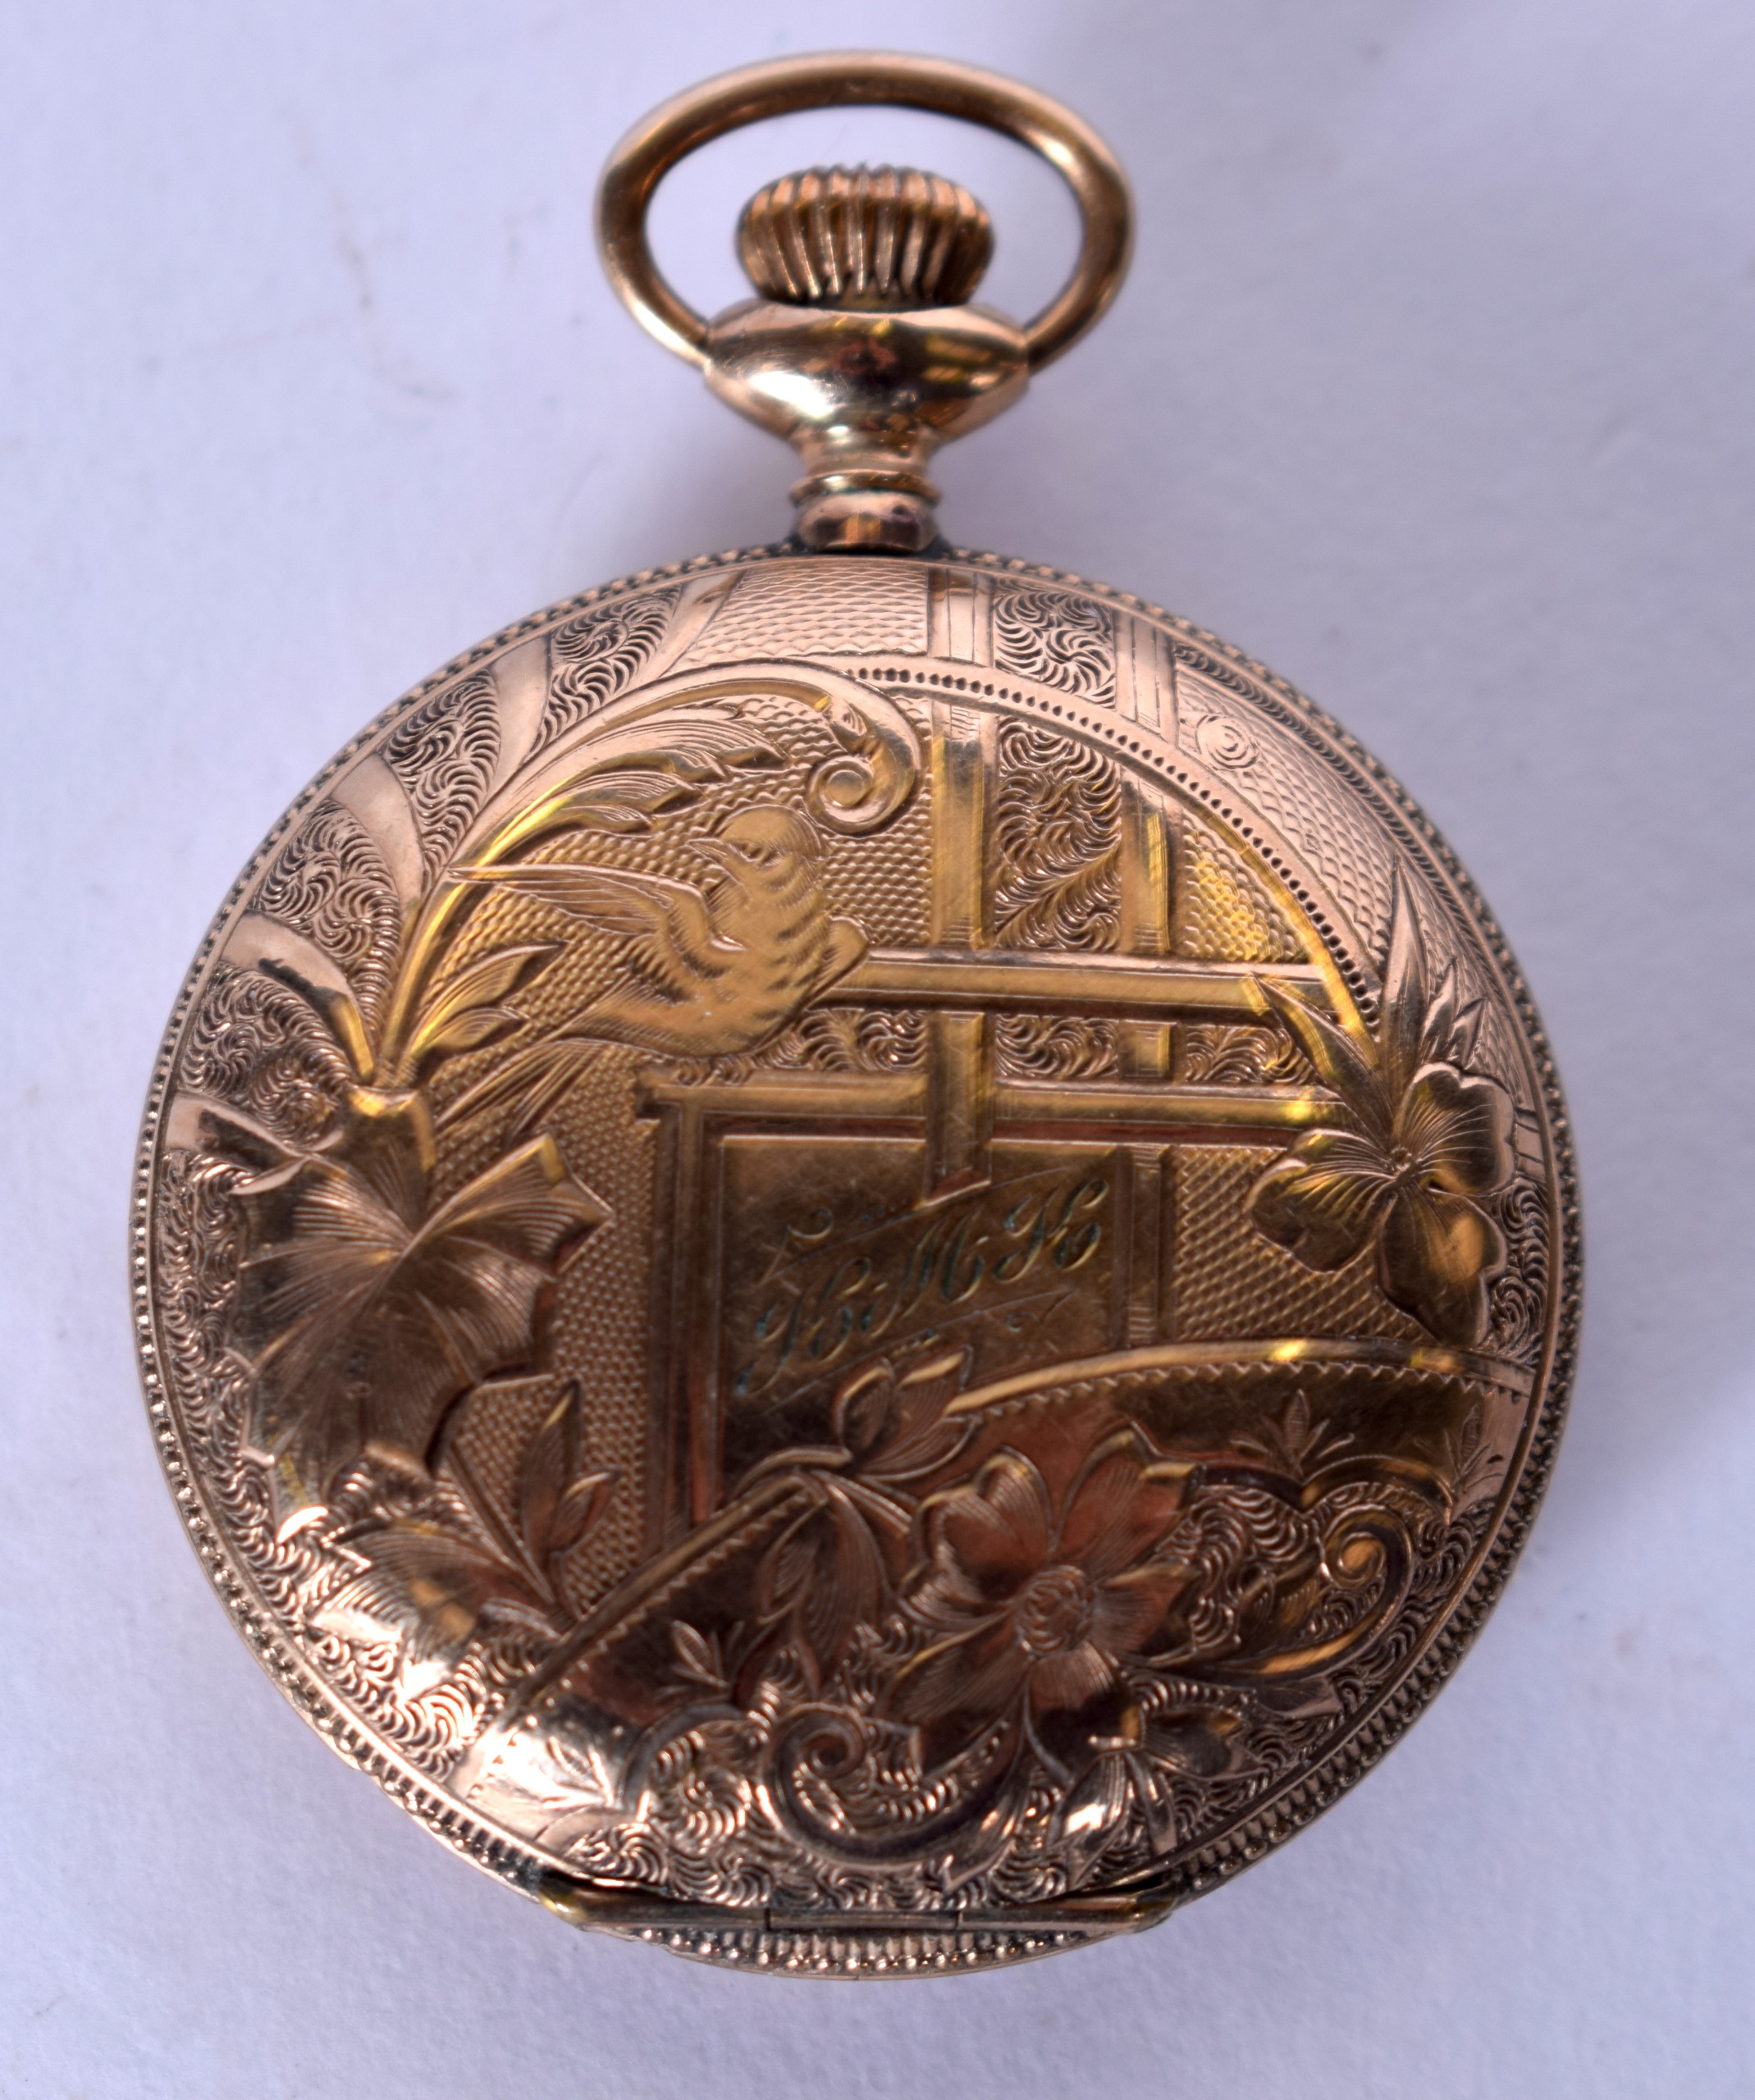 A NEW YORK STANDARD WATCH CO. YELLOW METAL POCKET WATCH, the case engraved with birds amongst - Image 2 of 4